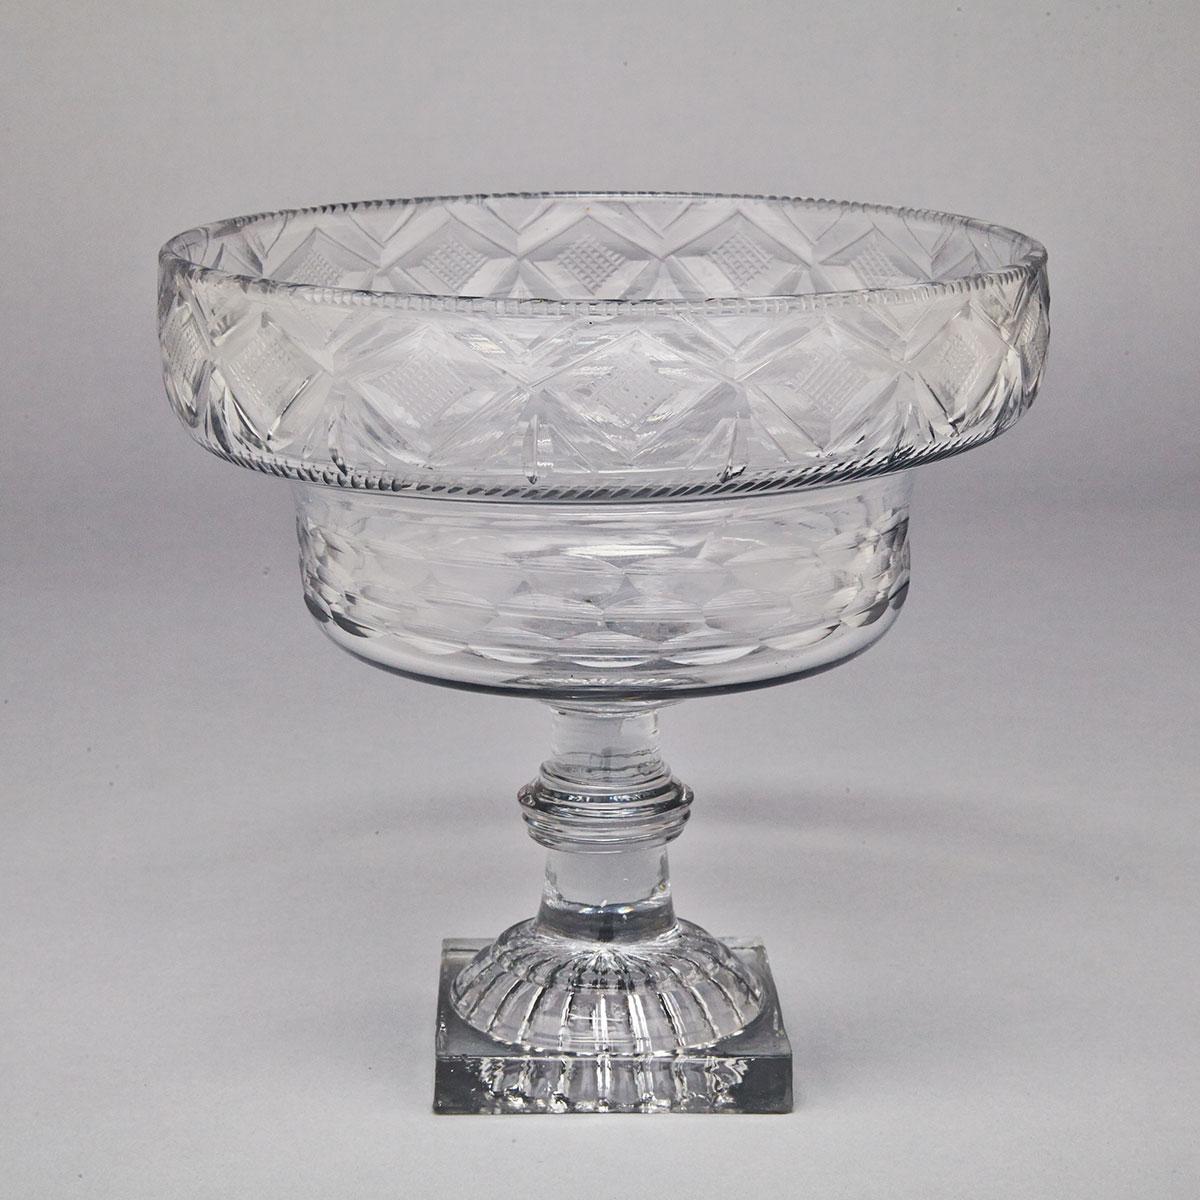 Anglo-Irish Cut Glass Pedestal Footed Bowl, c.1800